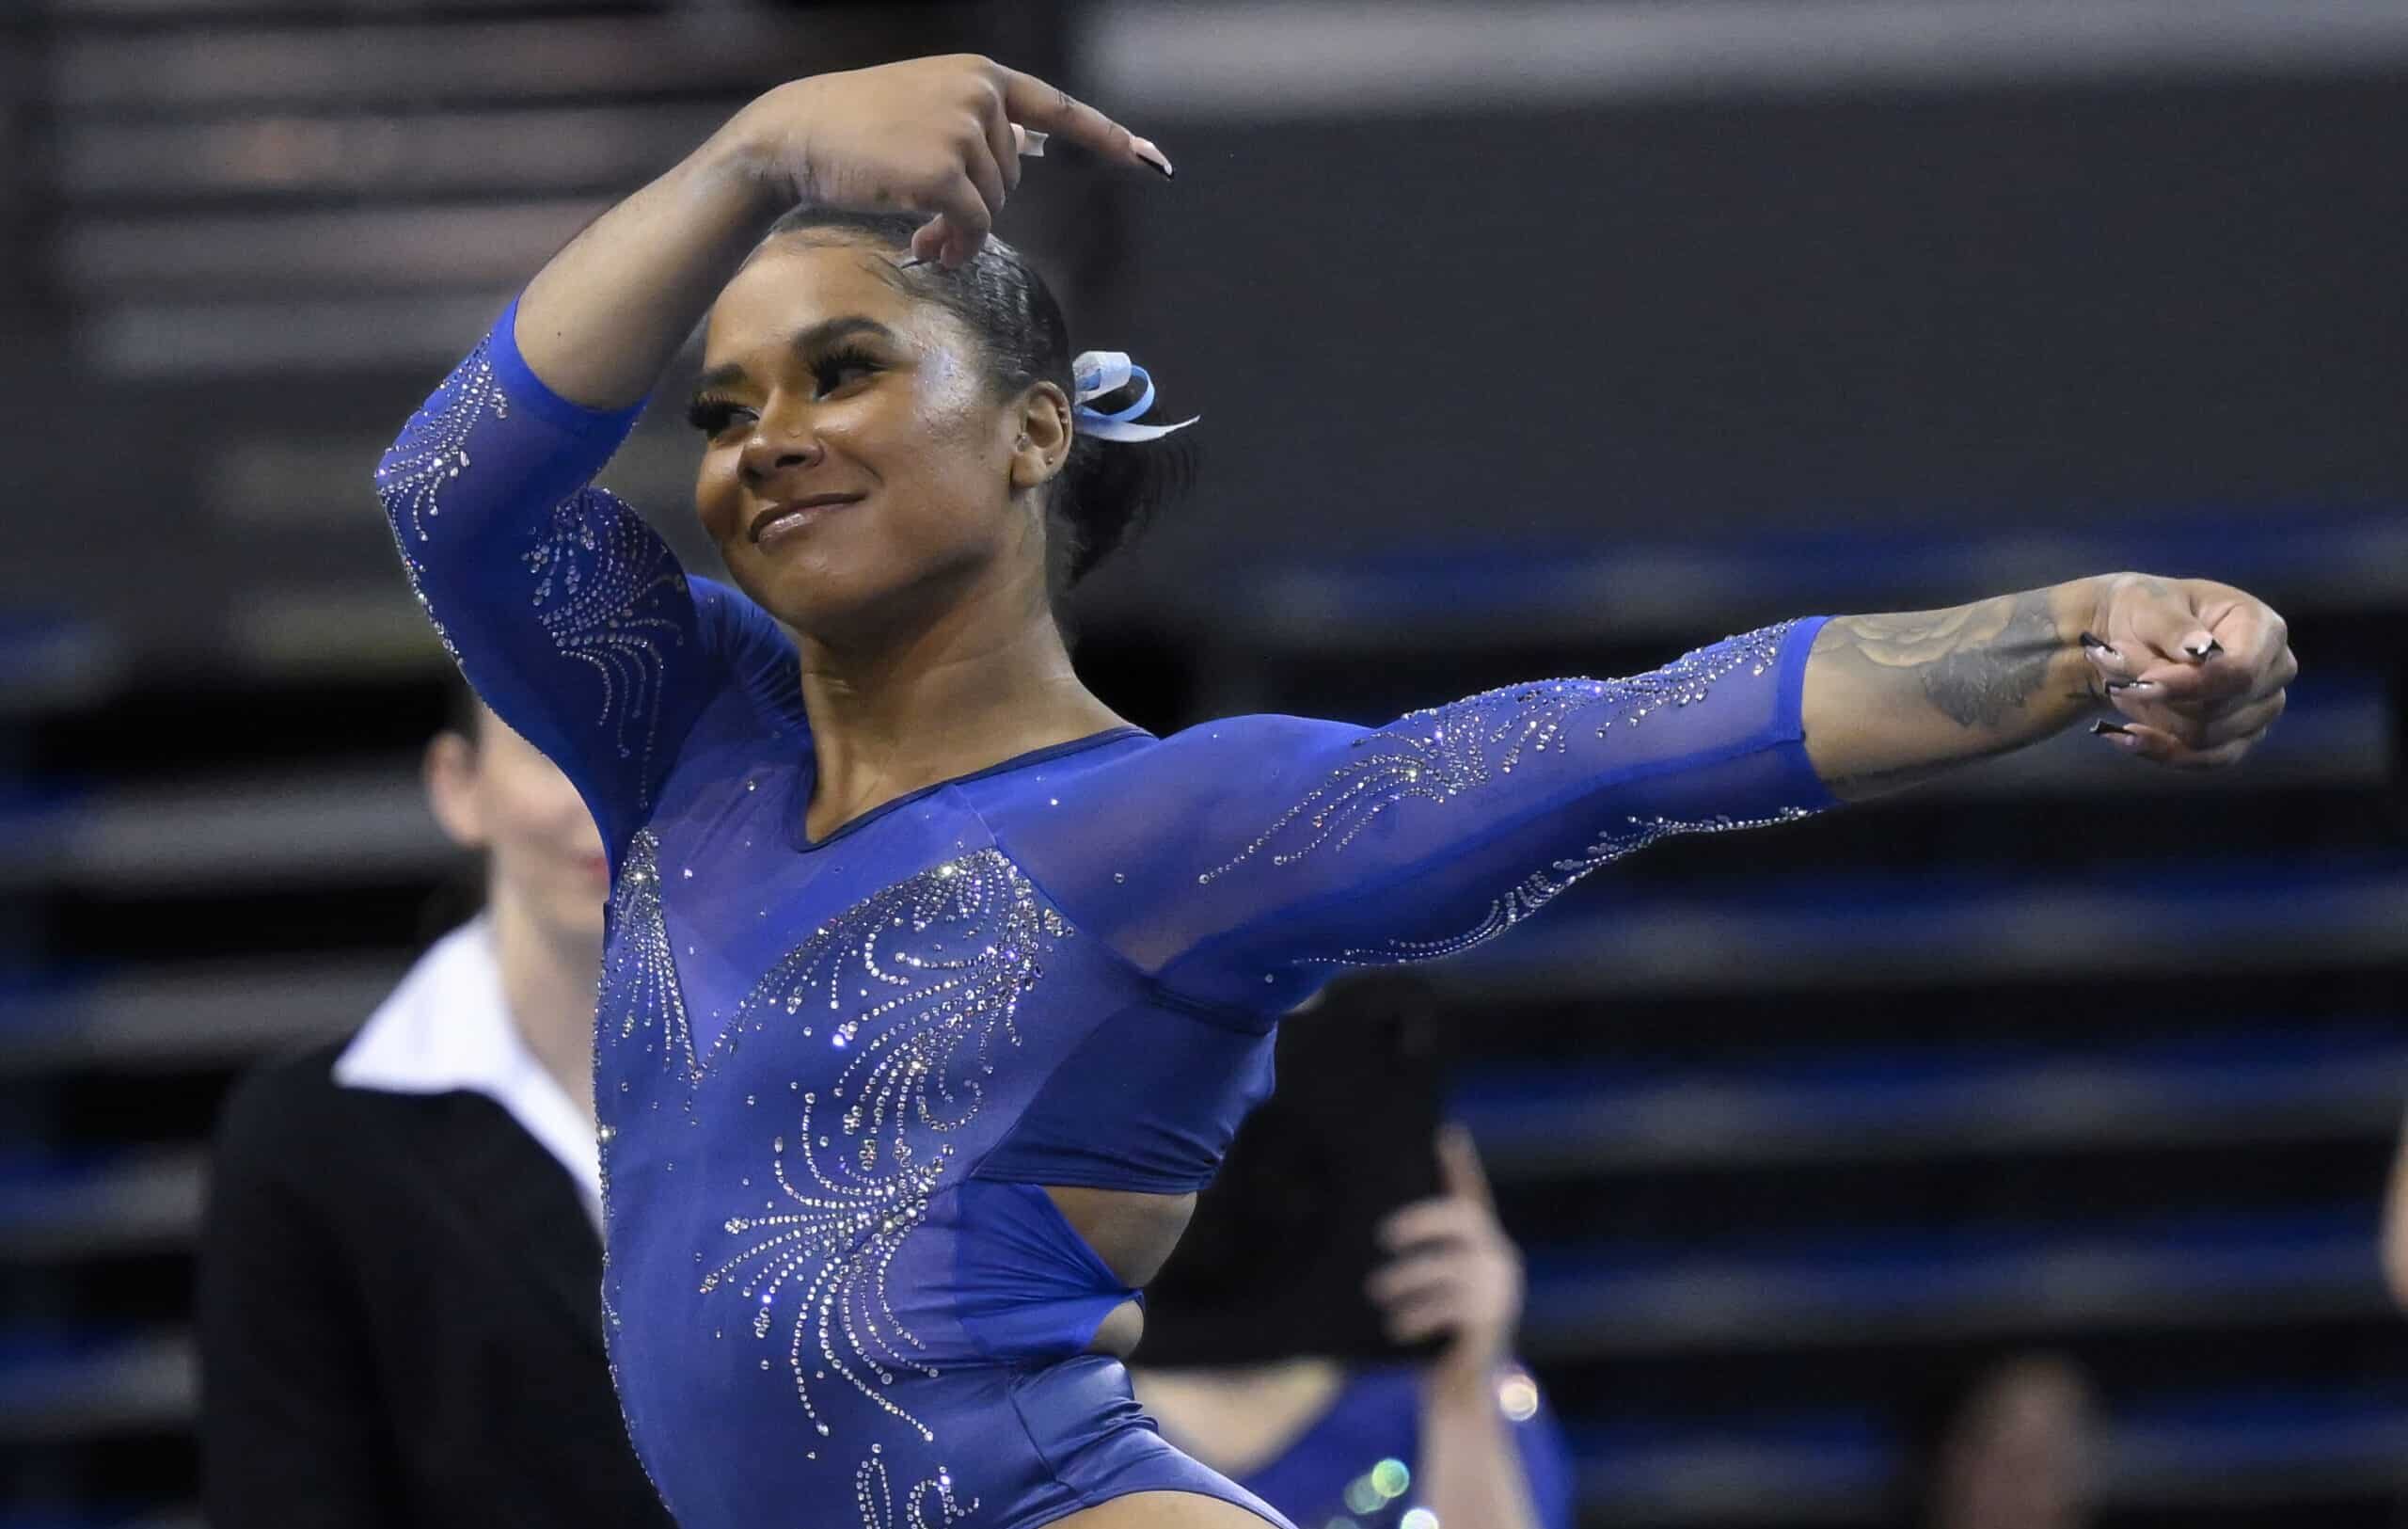 Apr 1, 2023; Los Angeles, CA, USA; UCLA Bruins athlete Jordan Chiles competes during the floor exercise competition at the NCAA Women’s Gymnastics Los Angeles Regional at Pauley Pavilion.